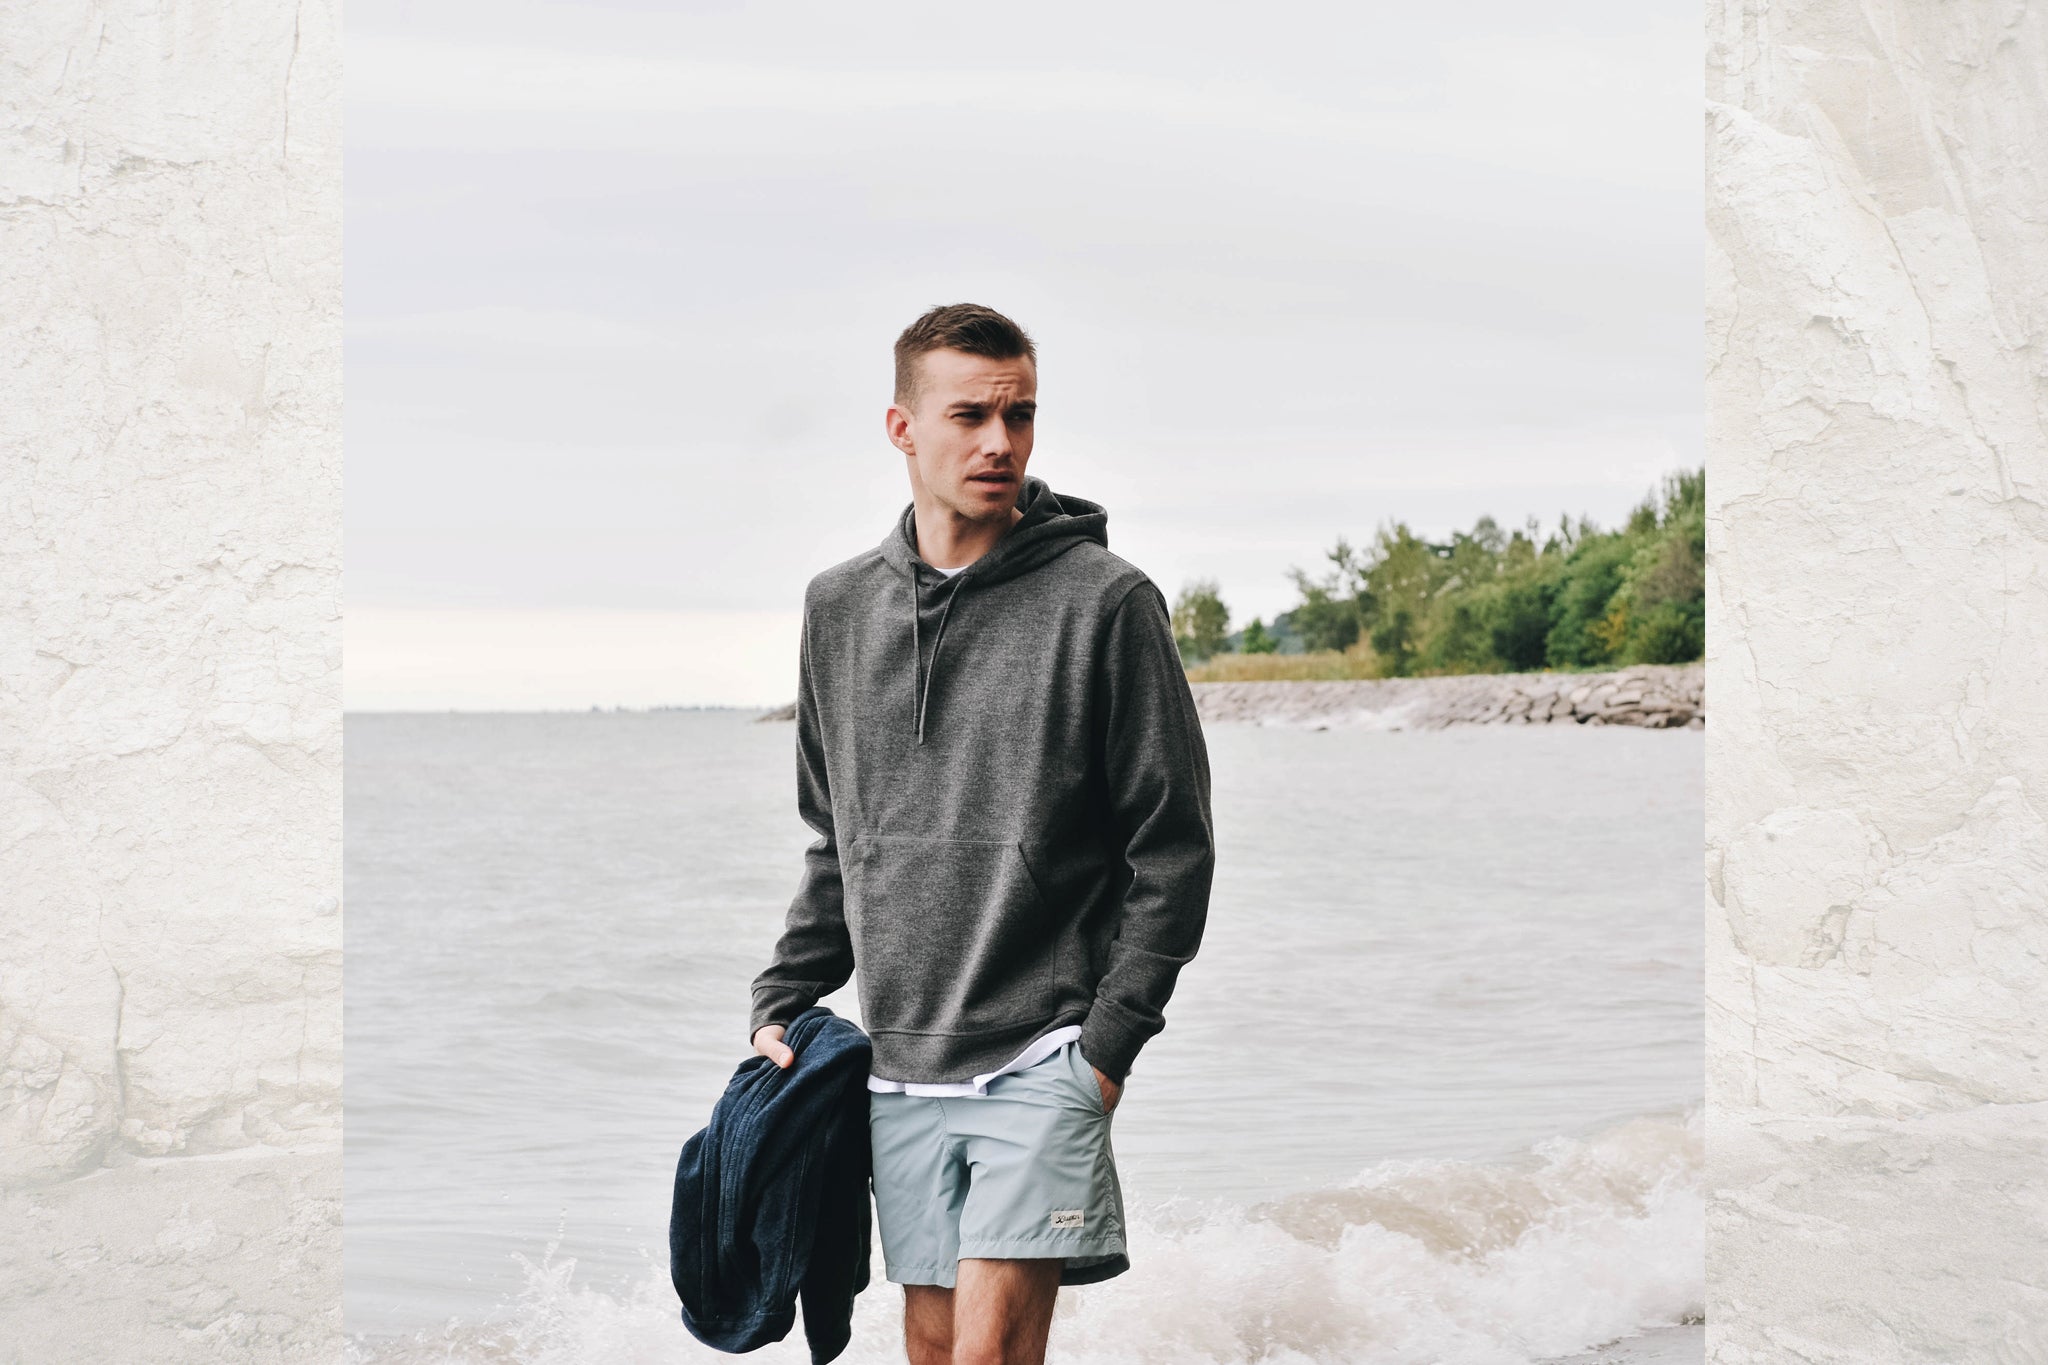 Man wearing swim trunks and a sweater on the beach